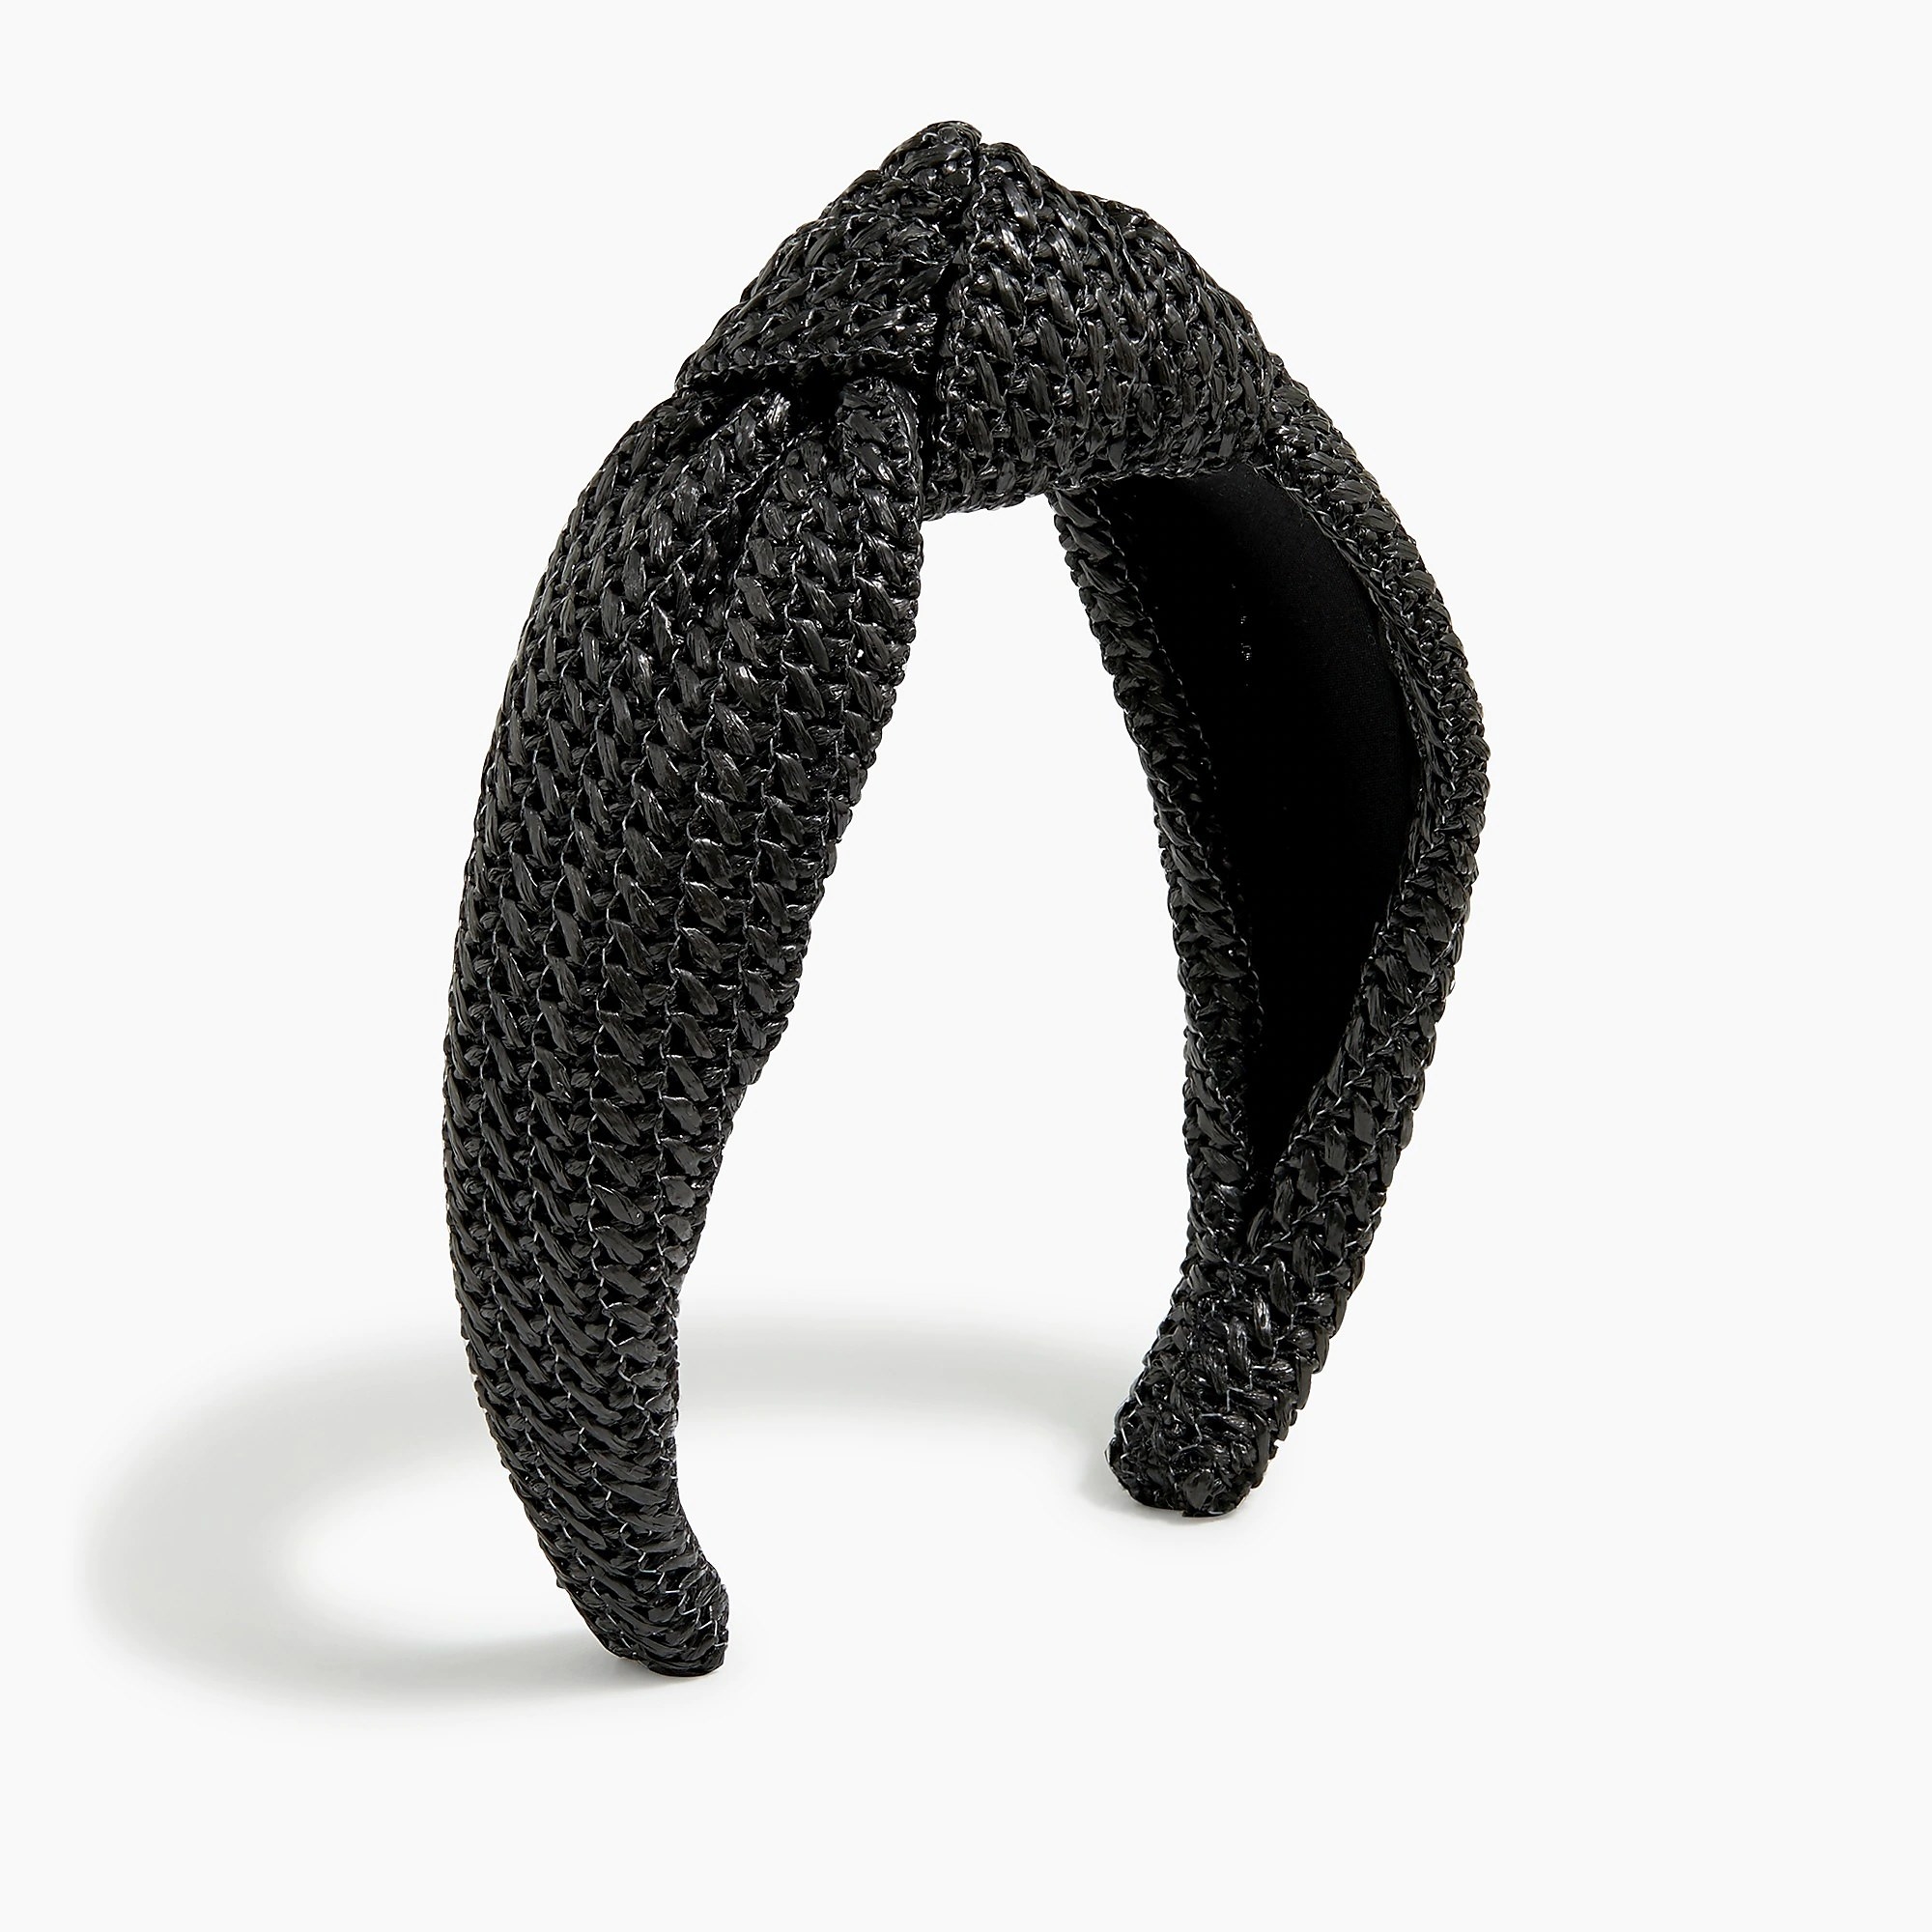 The textured black headband with a knot in the middle